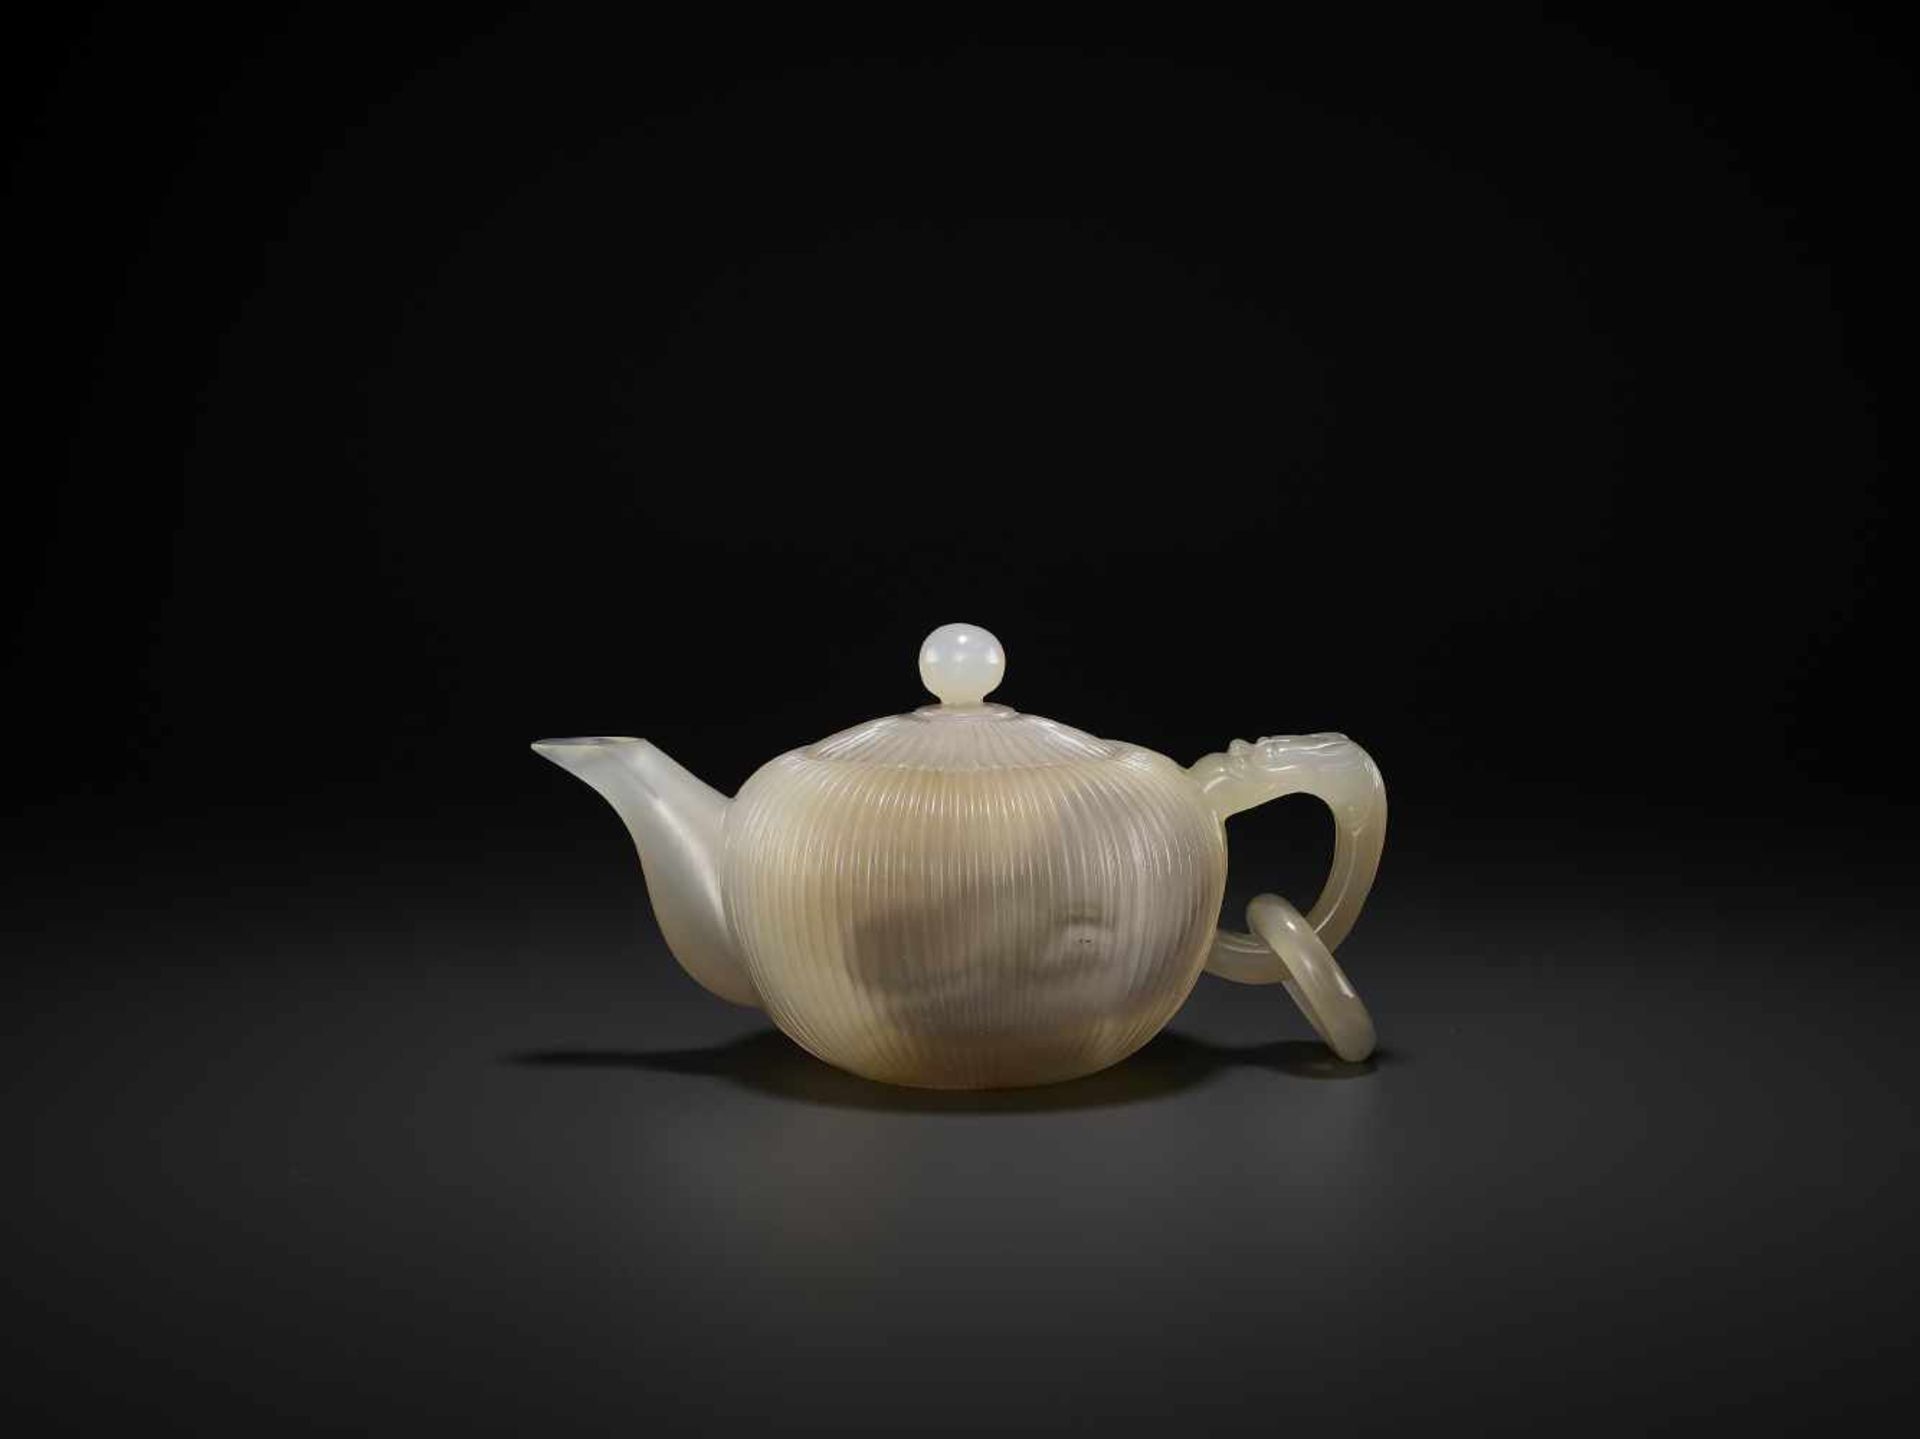 A MUGHAL STYLE AGATE TEAPOT, QING DYNASTY China, 1644-1911. Finely carved with a ribbed body and